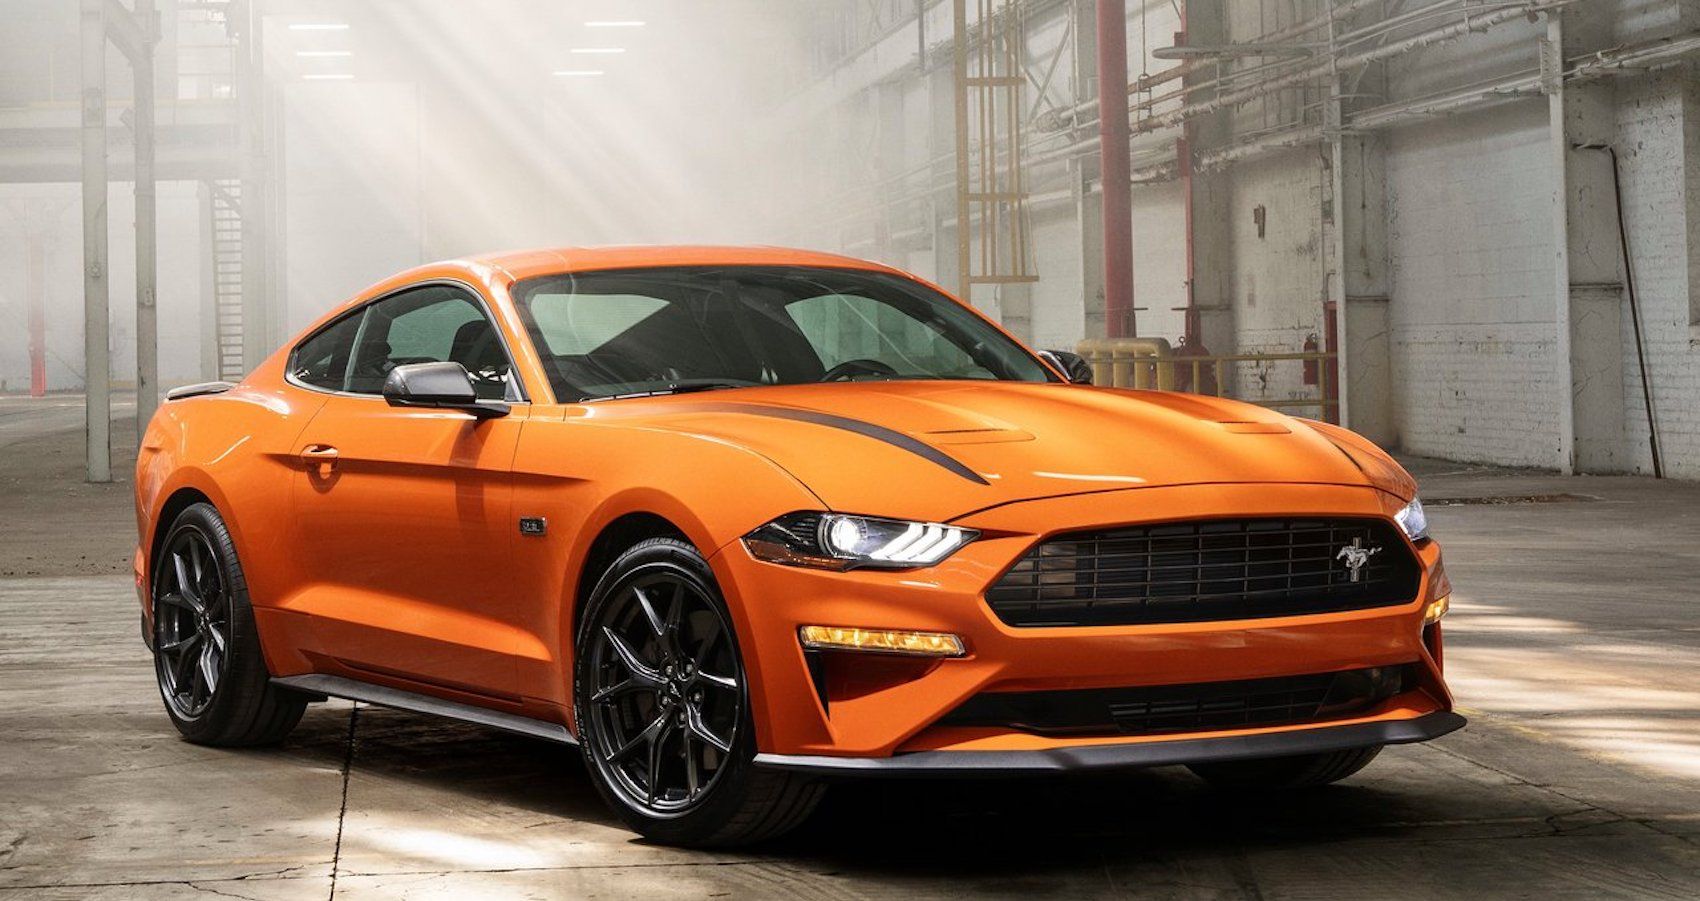 Ford Mustang EcoBoost front third quarter view